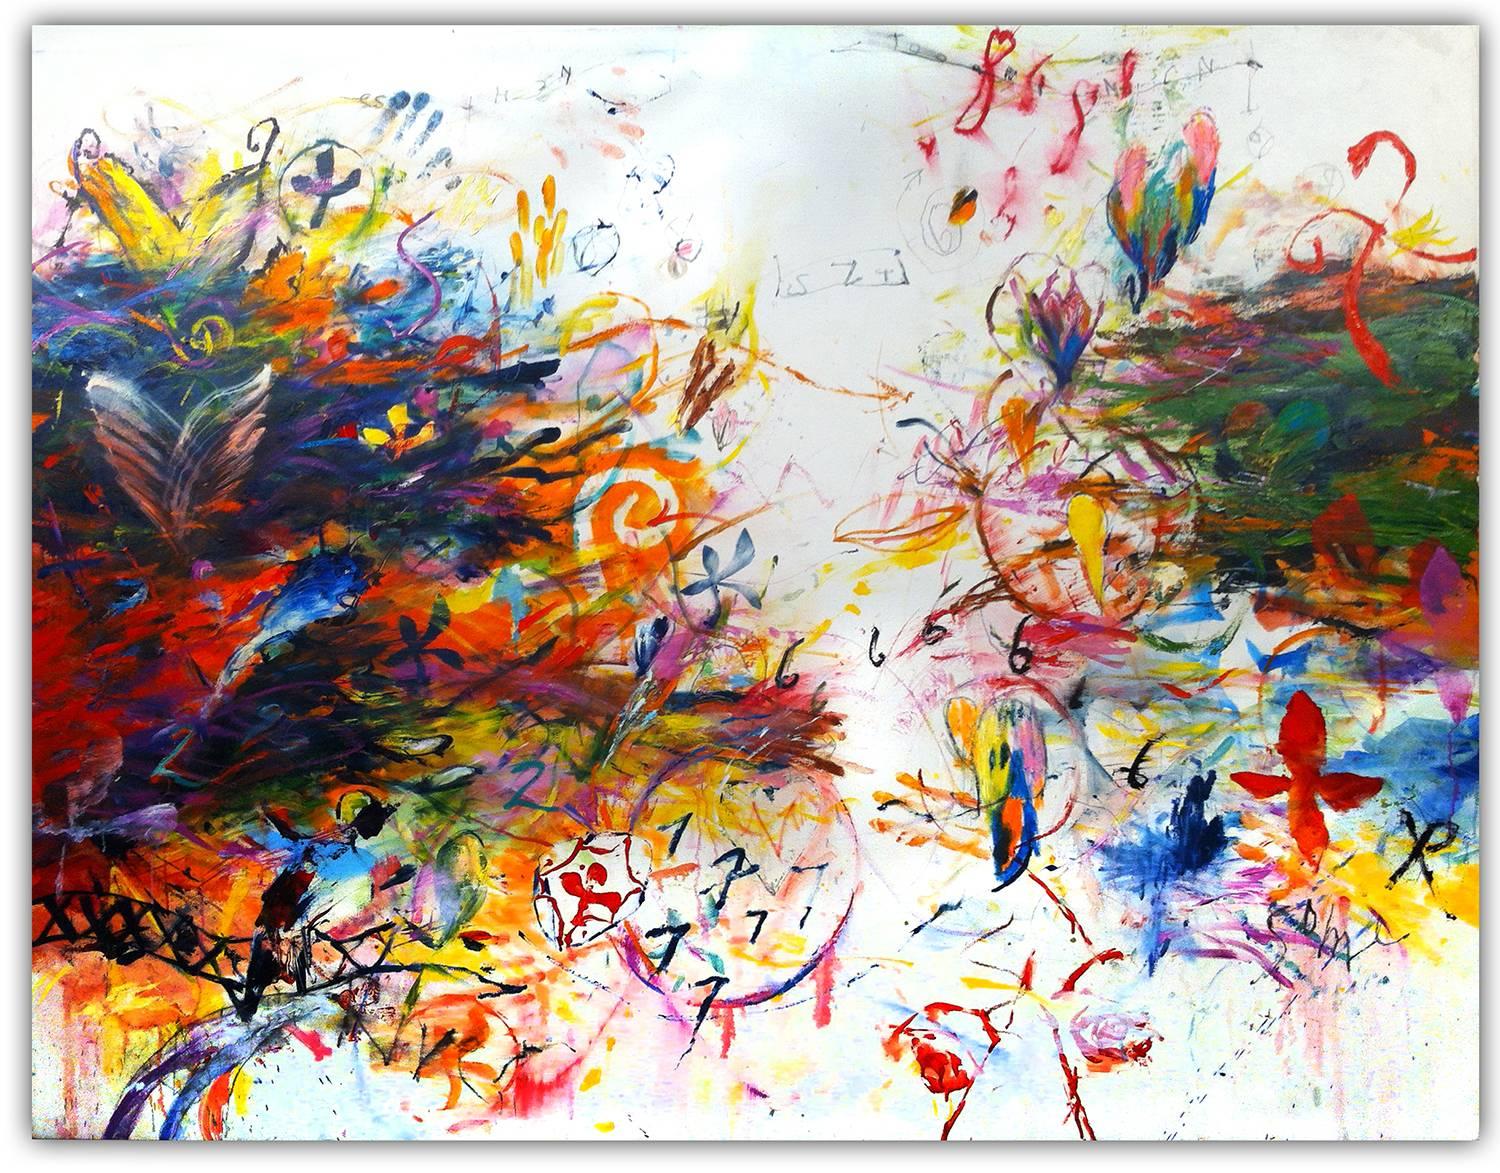 Ford Crull Abstract Painting - SYMBOLIC WIND - large colorful abstract painting with symbols